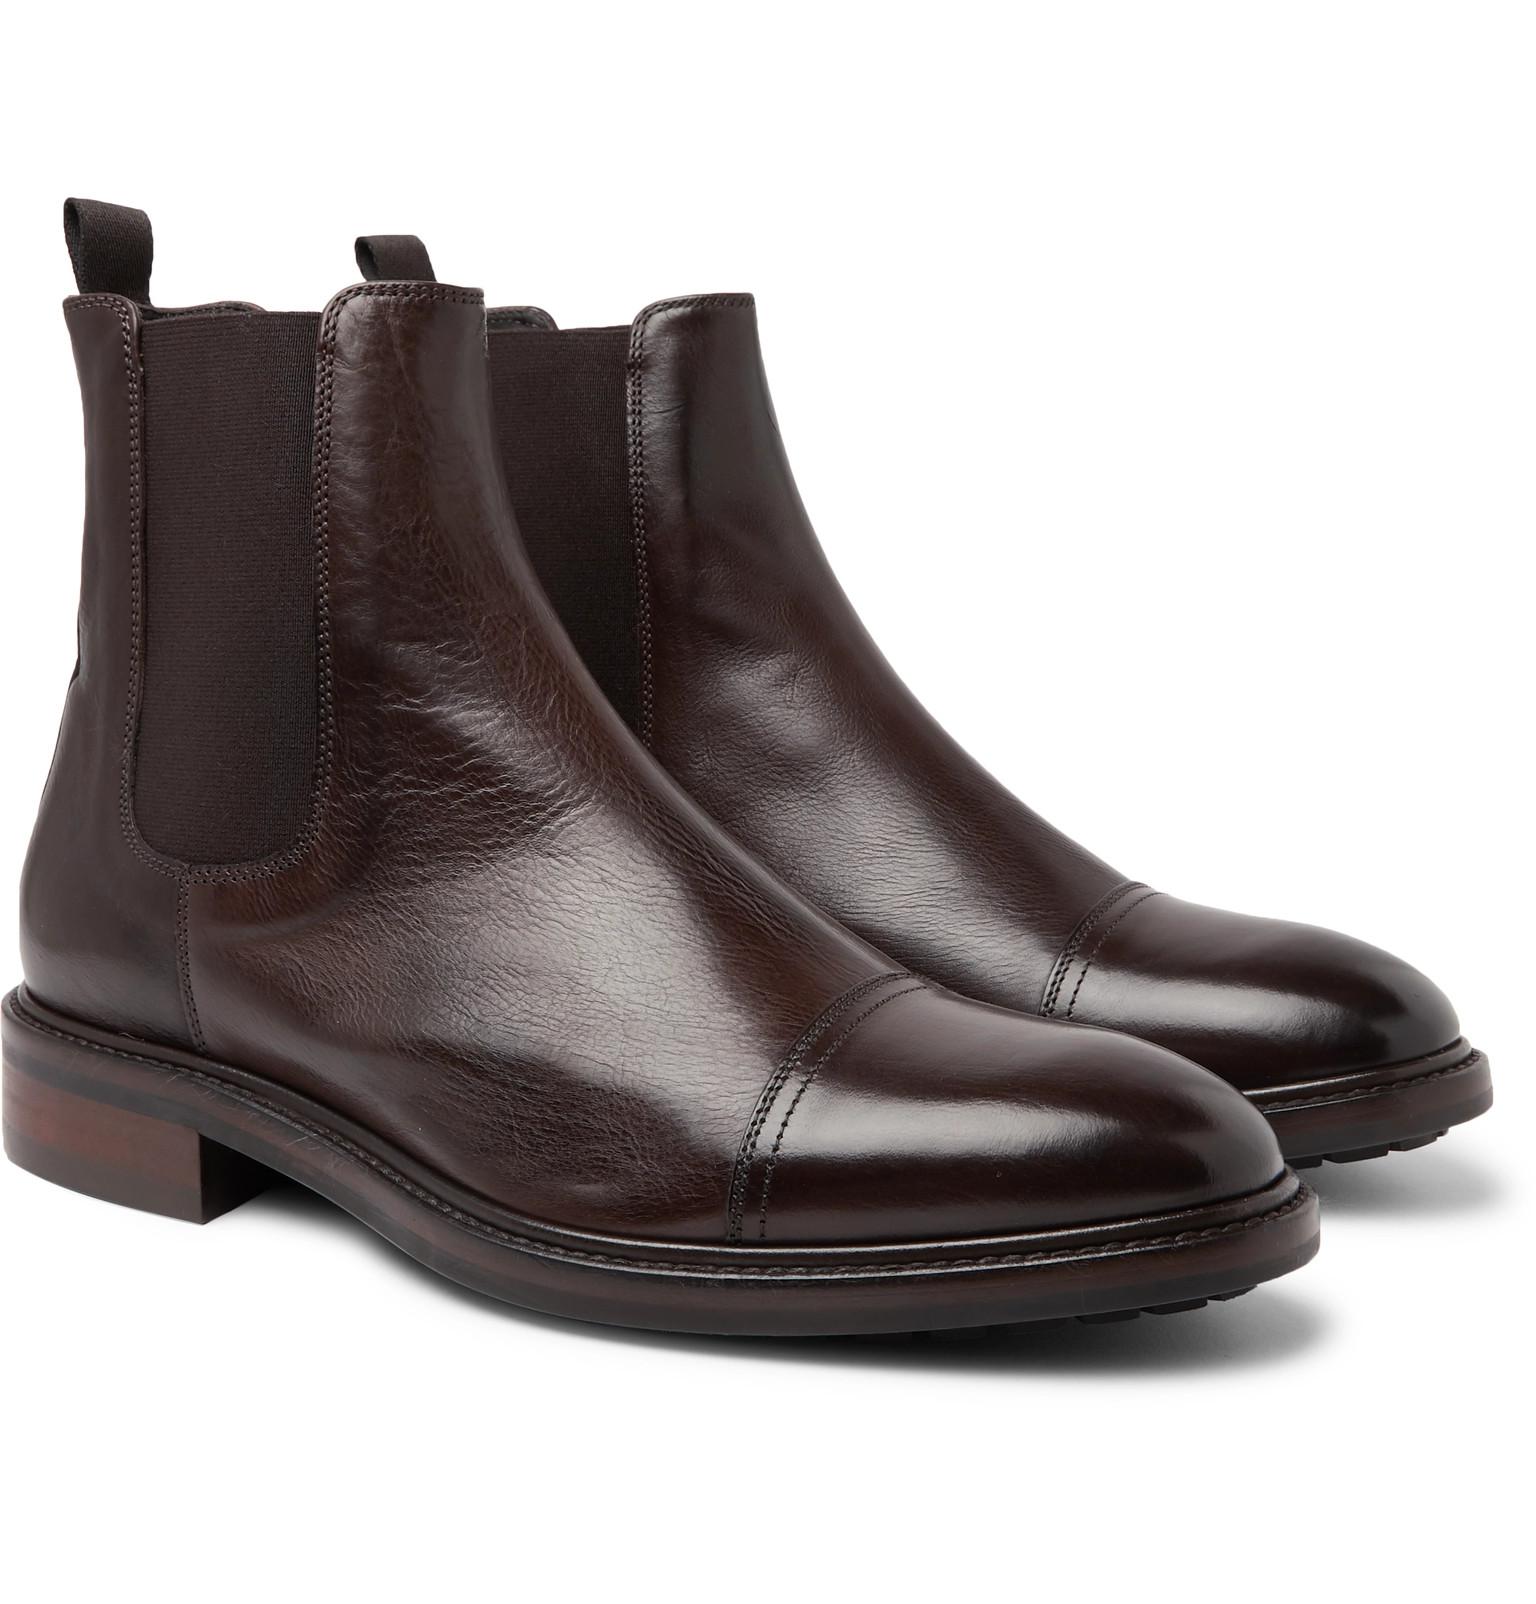 Paul Smith Jake Leather Chelsea Boots in Dark Brown (Brown) for Men - Lyst